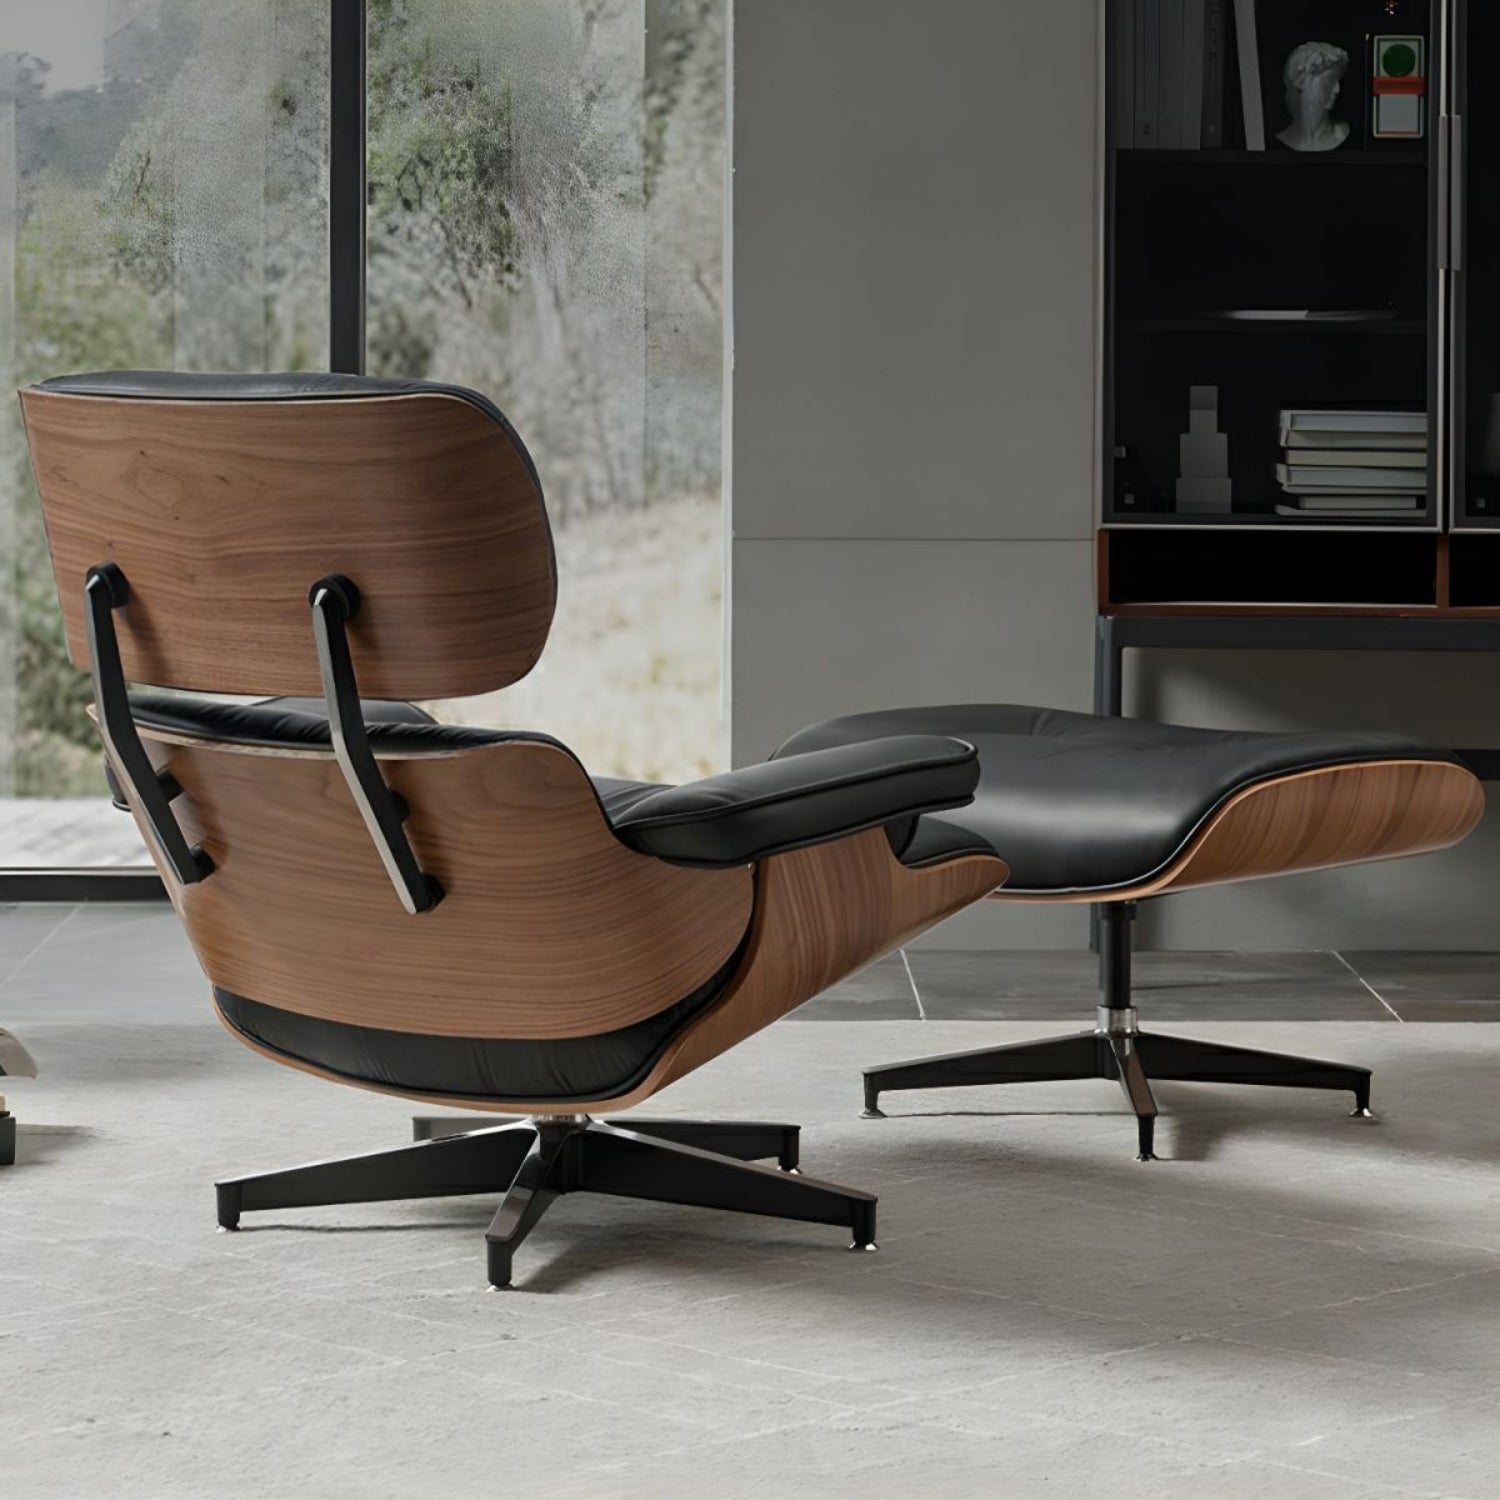 The Eames lounge chair and ottoman in a contemporary living room, showcasing the back design.